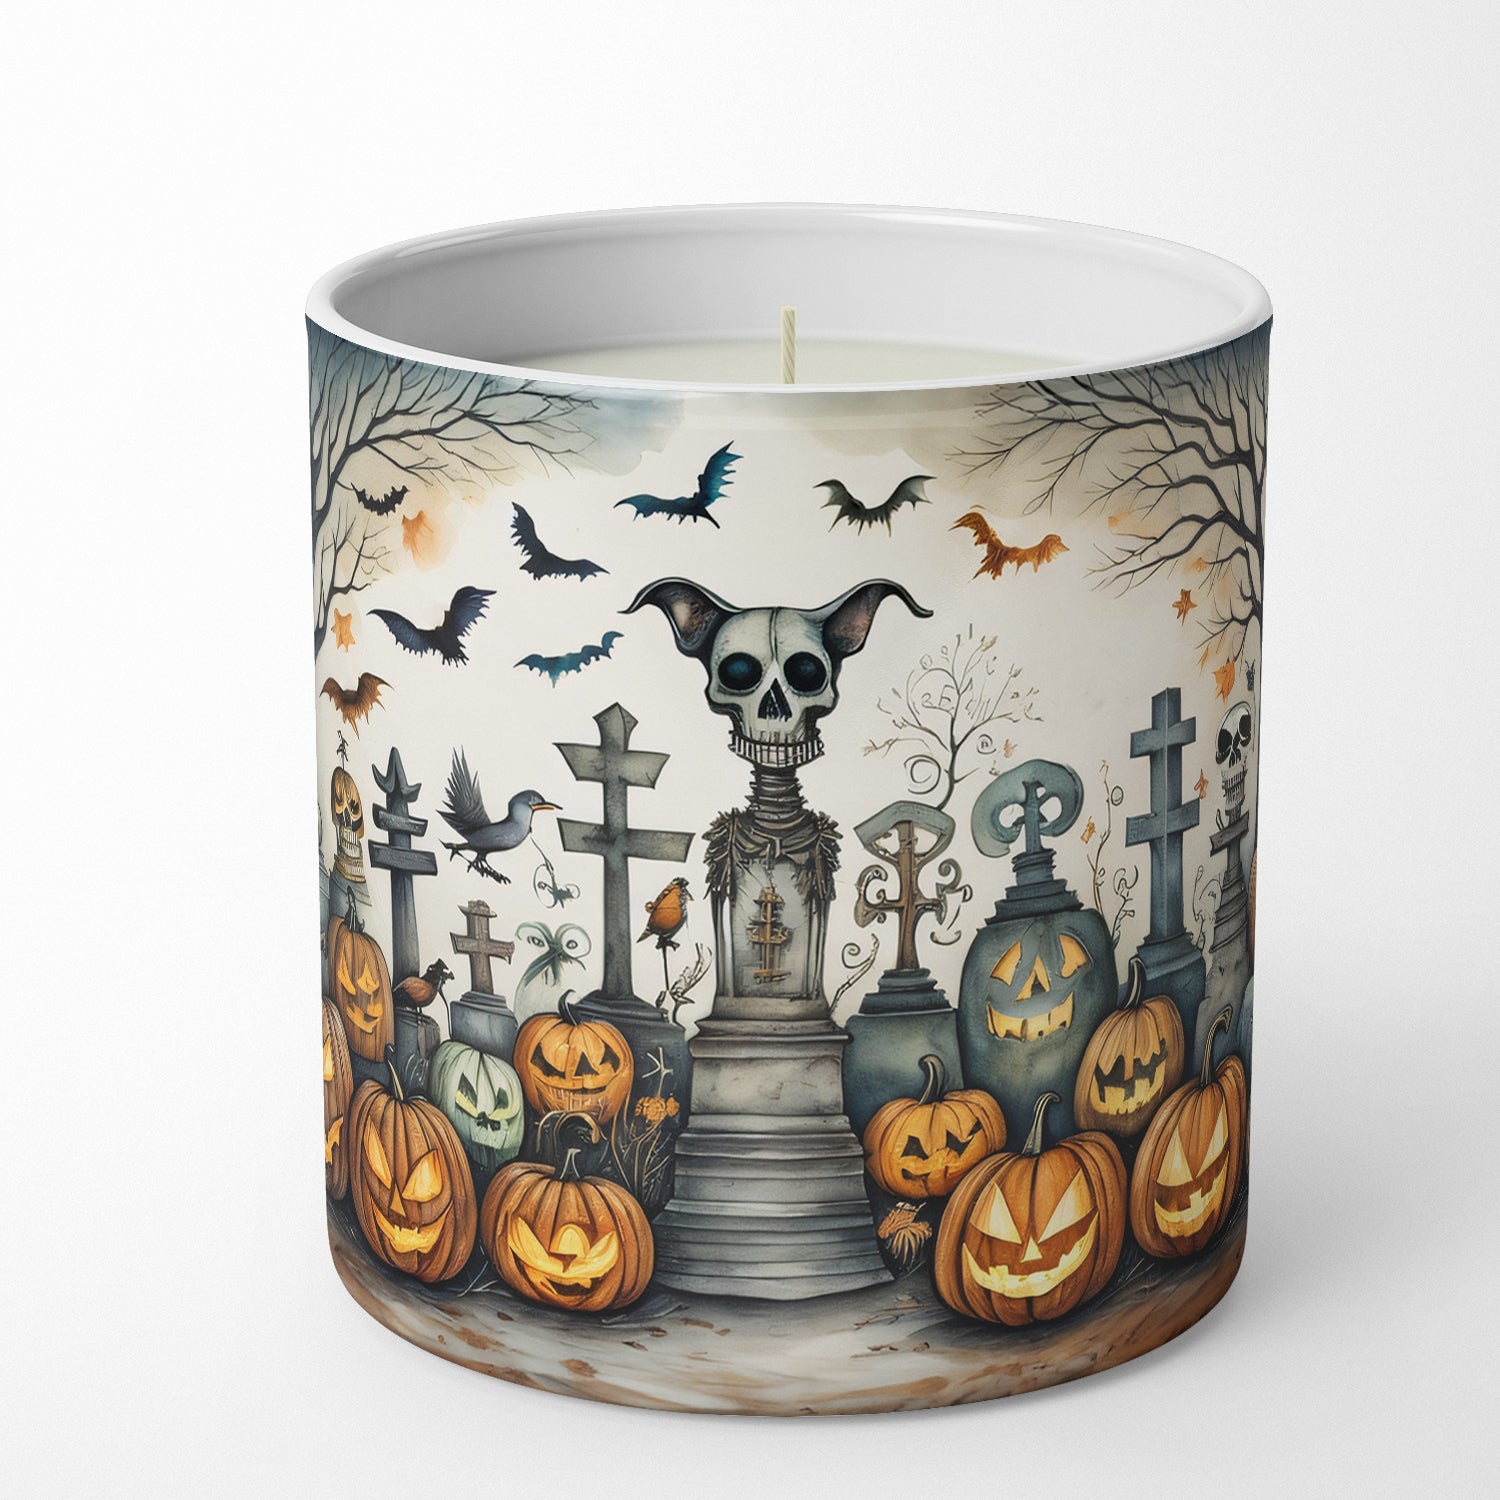 Pet Cemetery Spooky Halloween Decorative Soy Candle